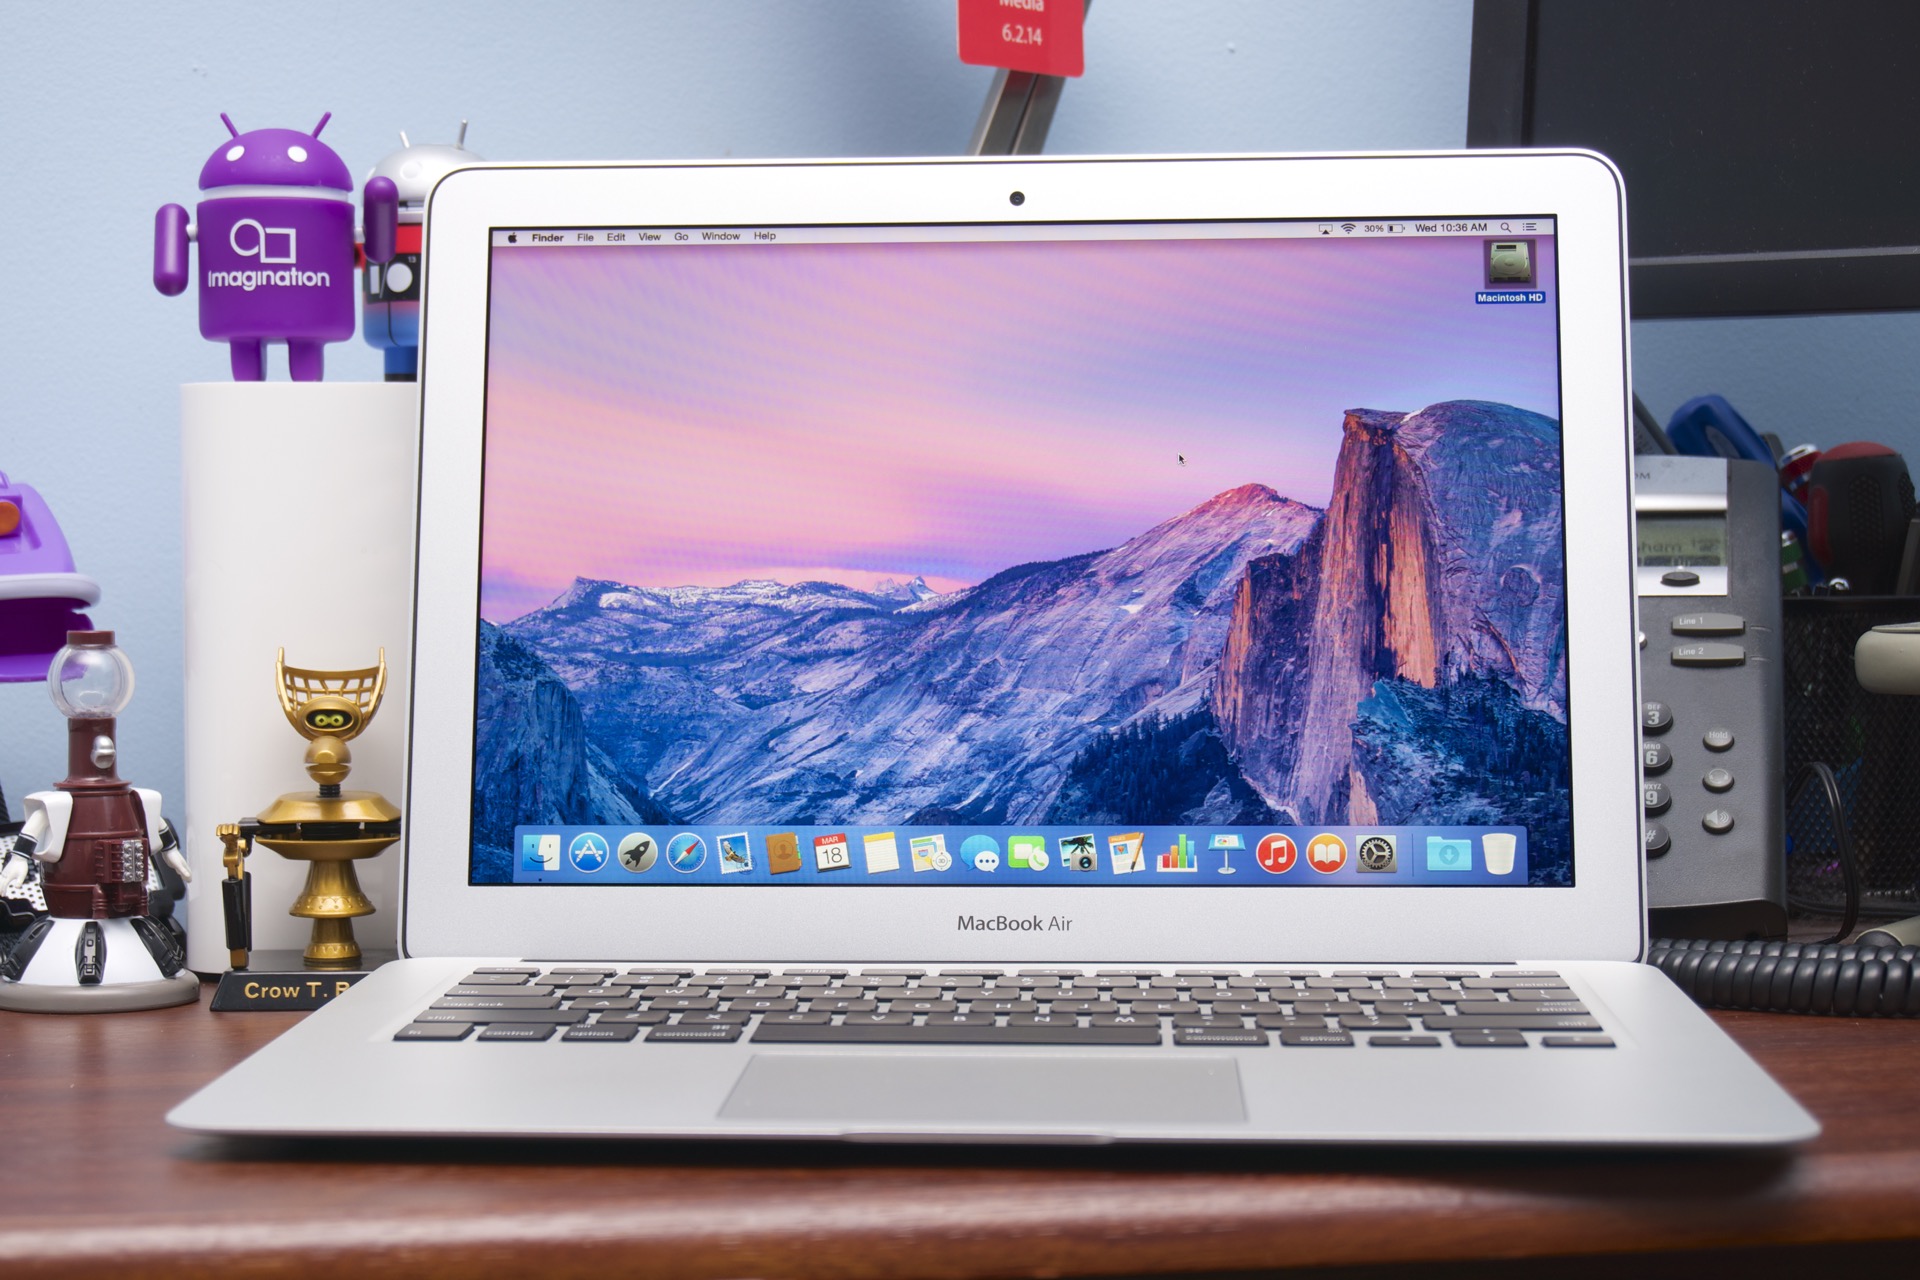 Review The 2015 MacBook Air’s oncetrailblazing design is showing its